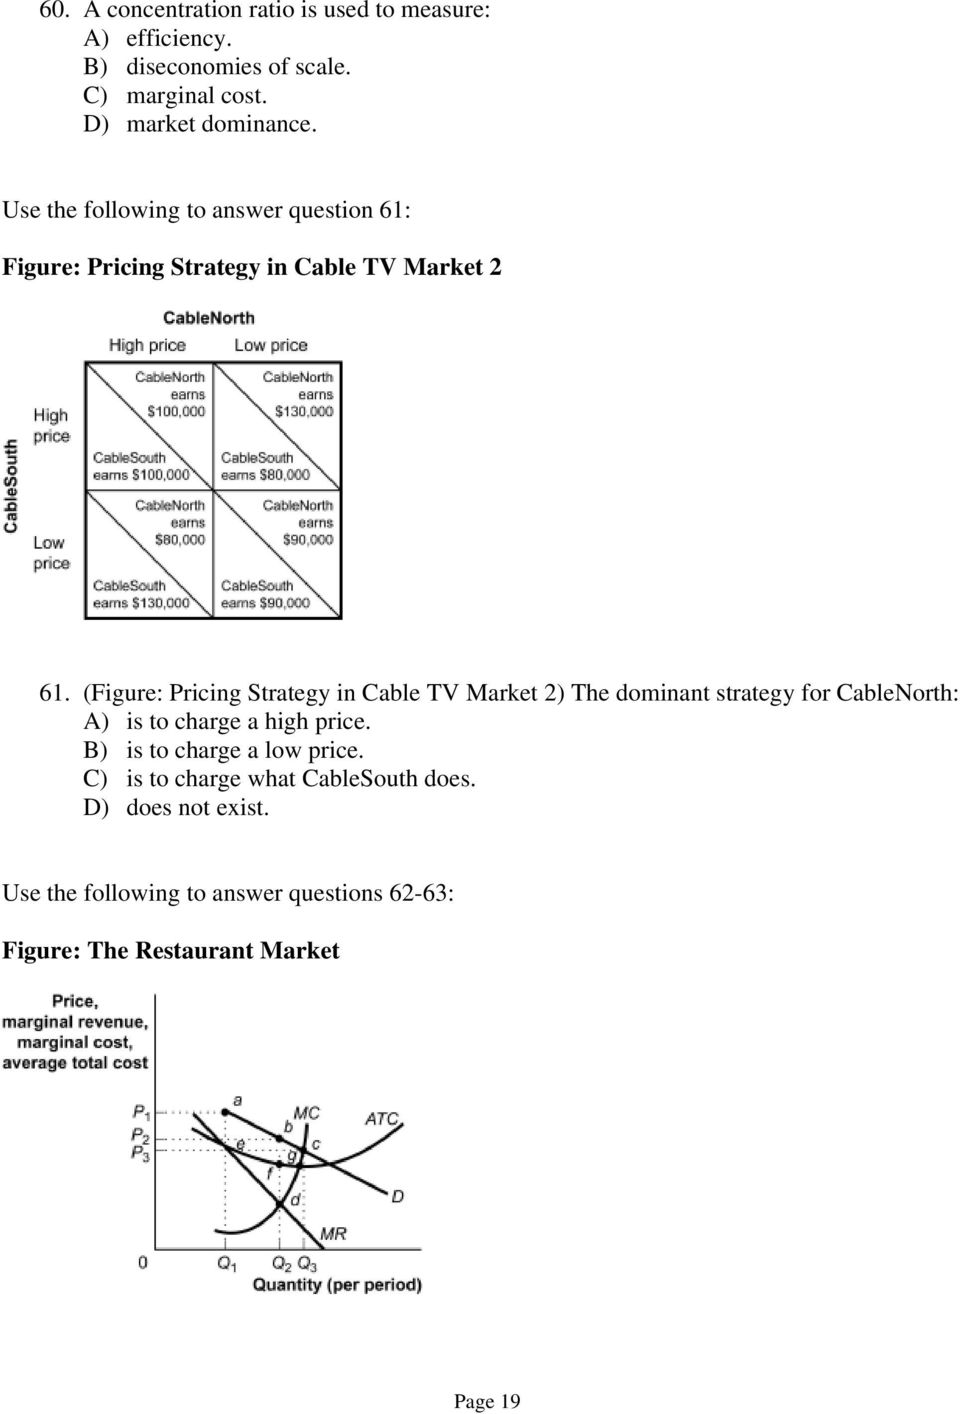 (Figure: Pricing Strategy in Cable TV Market 2) The dominant strategy for CableNorth: A) is to charge a high price.